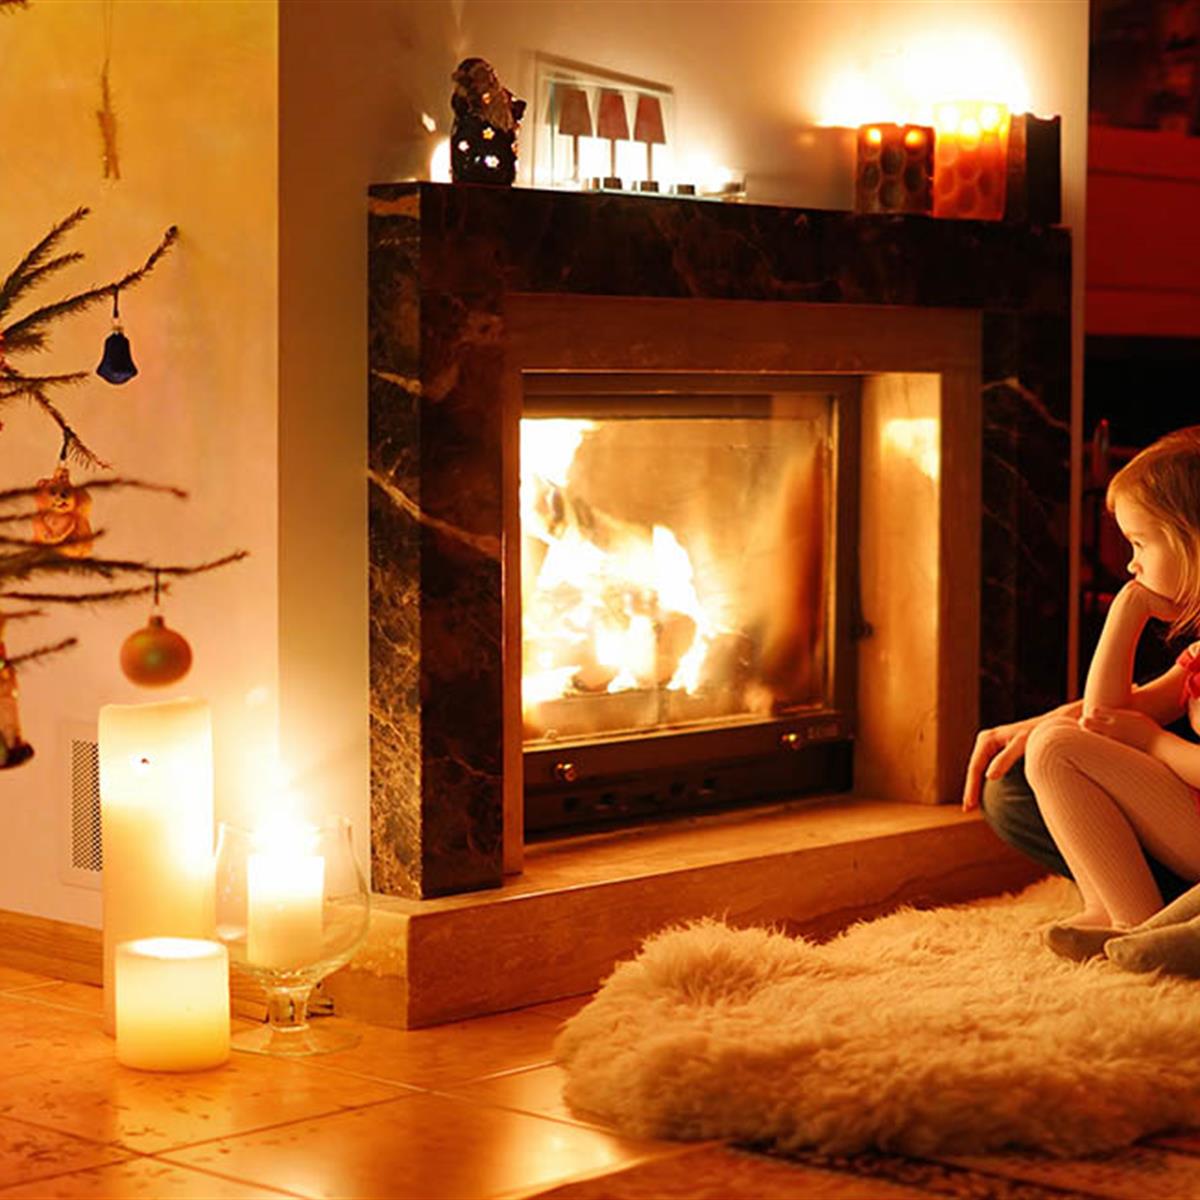 Fireplaces are cozy, but they can be dangerous if not used properly. Remember these safety tips next time you use yours: bit.ly/2Ef9jJW. 
#fireplace
#franklinlinsuranellc
#cliffpetersinsurance
bit.ly/2Ef9jJW